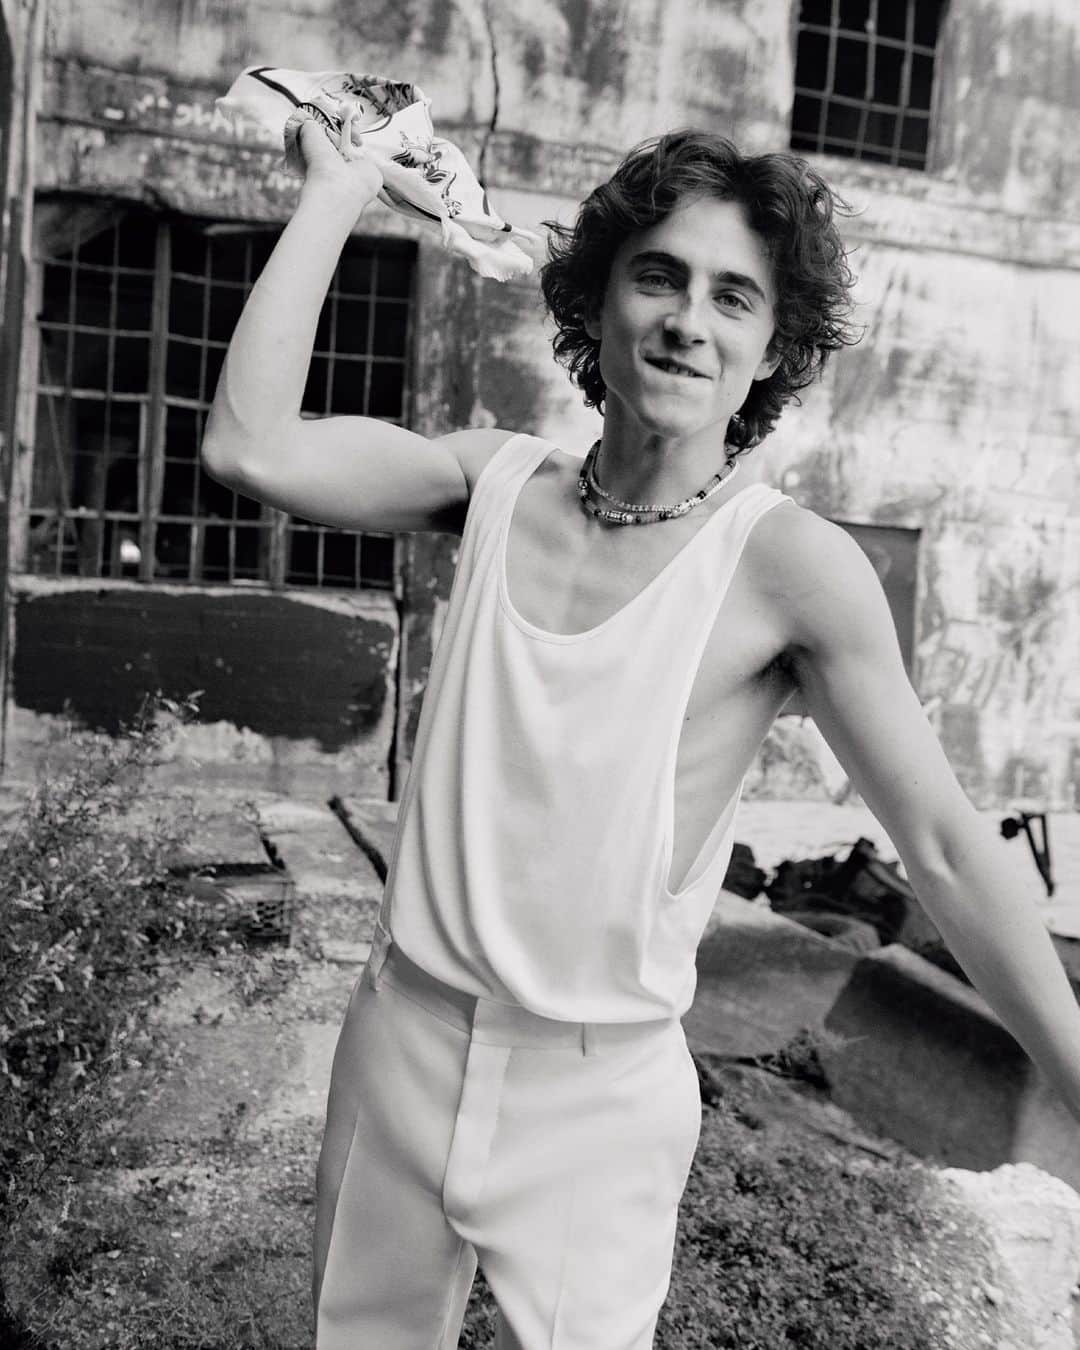 GQのインスタグラム：「“I hope that when I do this next movie, and you talk to me at the end of it, I’ll be in ruins.”  This is our third cover story with Timothée Chalamet, part of an ongoing project of charting the young actor through the most important moments of his life and career. For this issue, he shares his thoughts on coming of age. Read the full profile at the link in bio.  Written by @danielvriley Photography by @cassblackbird Styled by @heidibivens Hair by @ward_hair_official Skin by @karinamilan__ Productionby @boomproductions Set by @studio_hans_nyc」